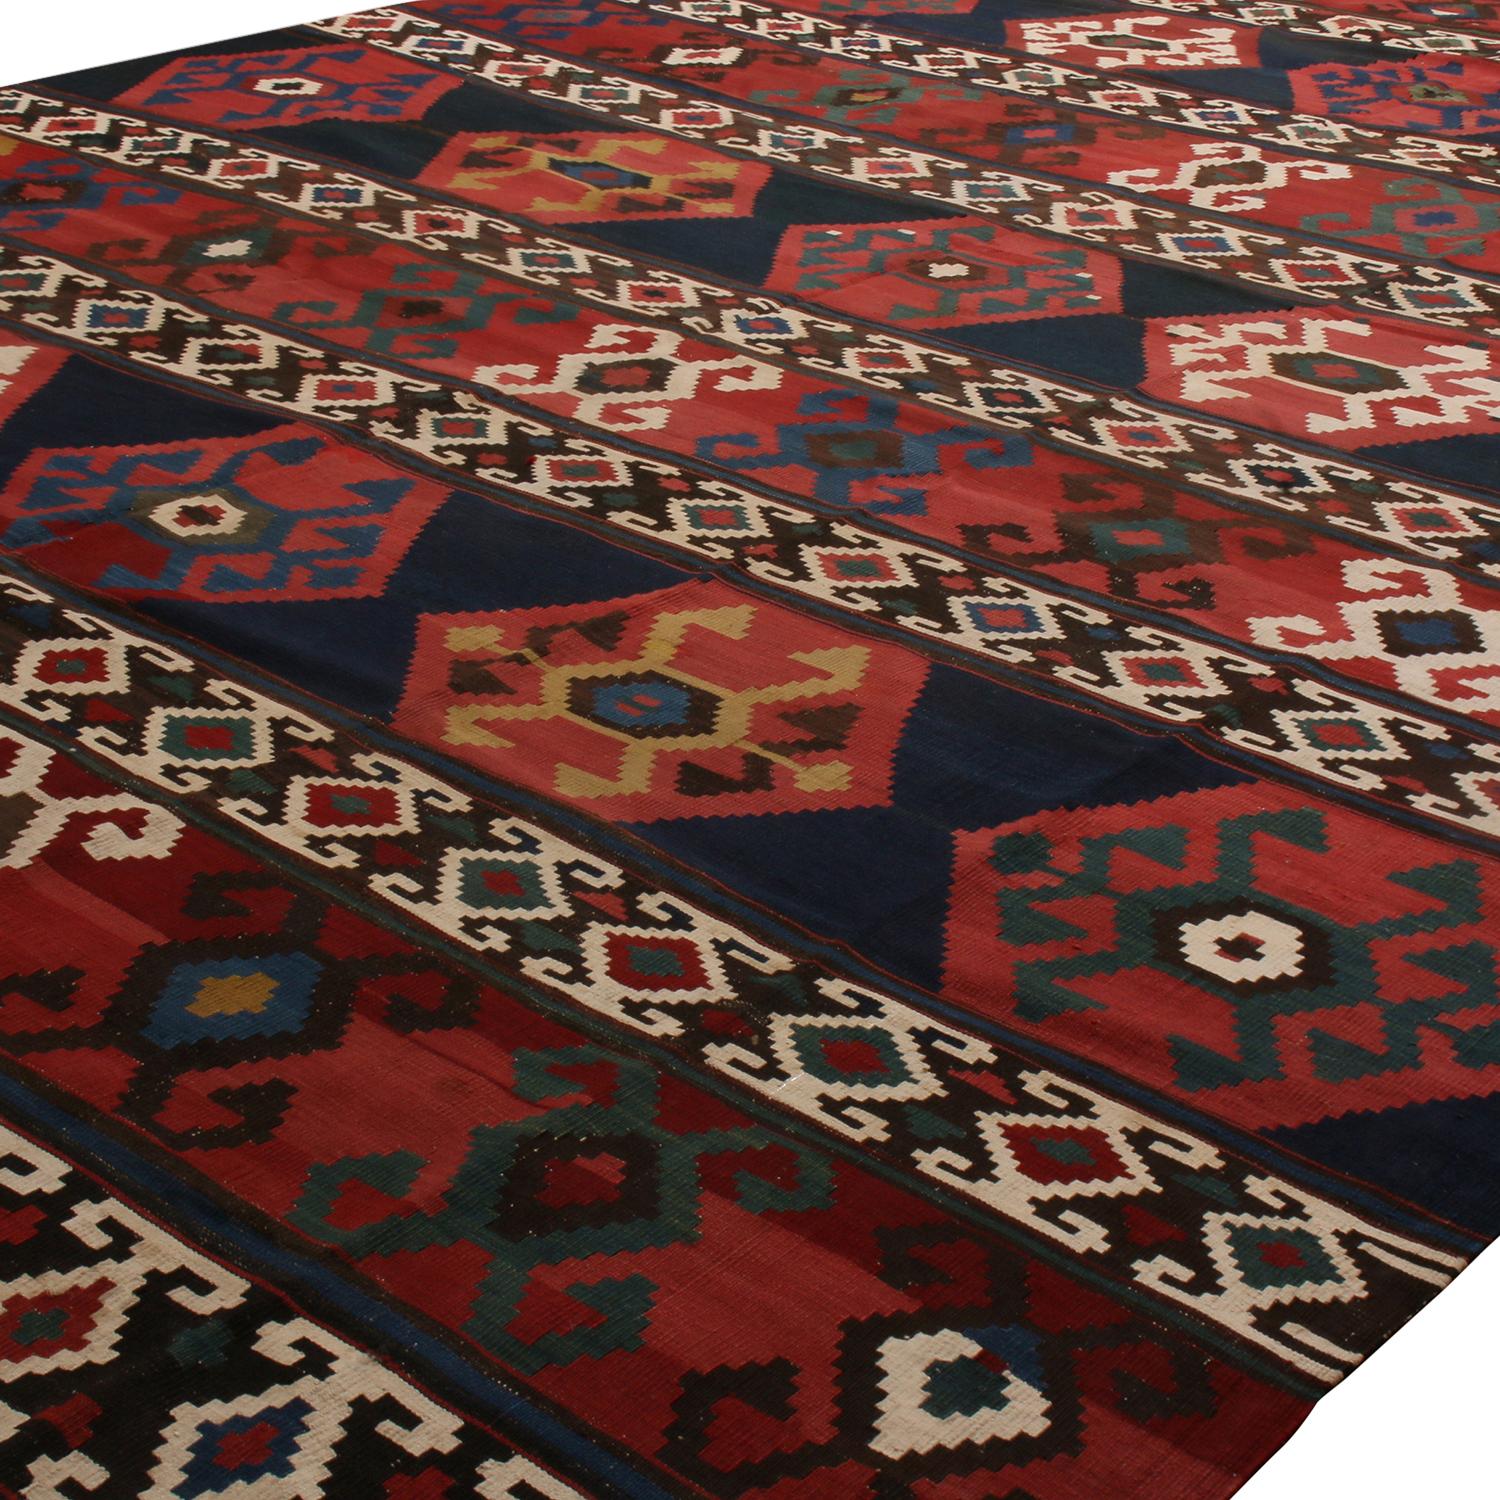 Flat-woven with high-quality wool featuring the best yarn and natural dye of its time, this antique geometric wool Kilim originates from Turkey more than 120 years prior in excellent condition, offering an arresting dimensionality in the slightly